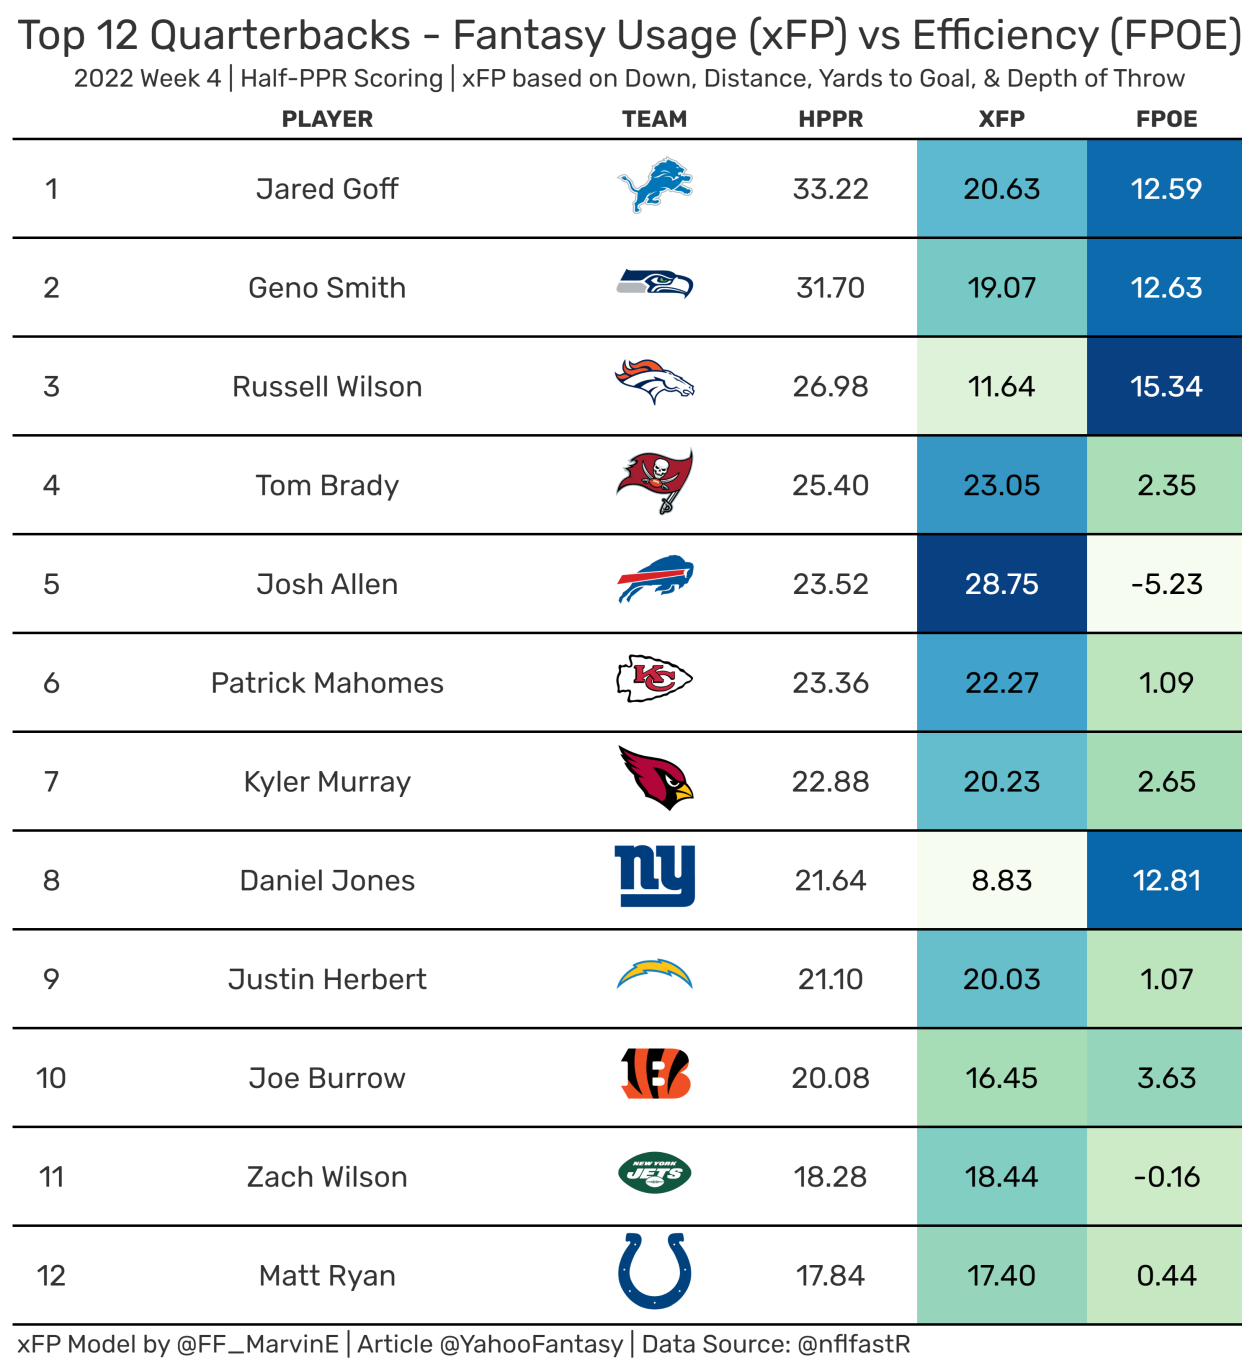 Top-12 Fantasy Quarterbacks from Week 4. (Data used provided by nflfastR)